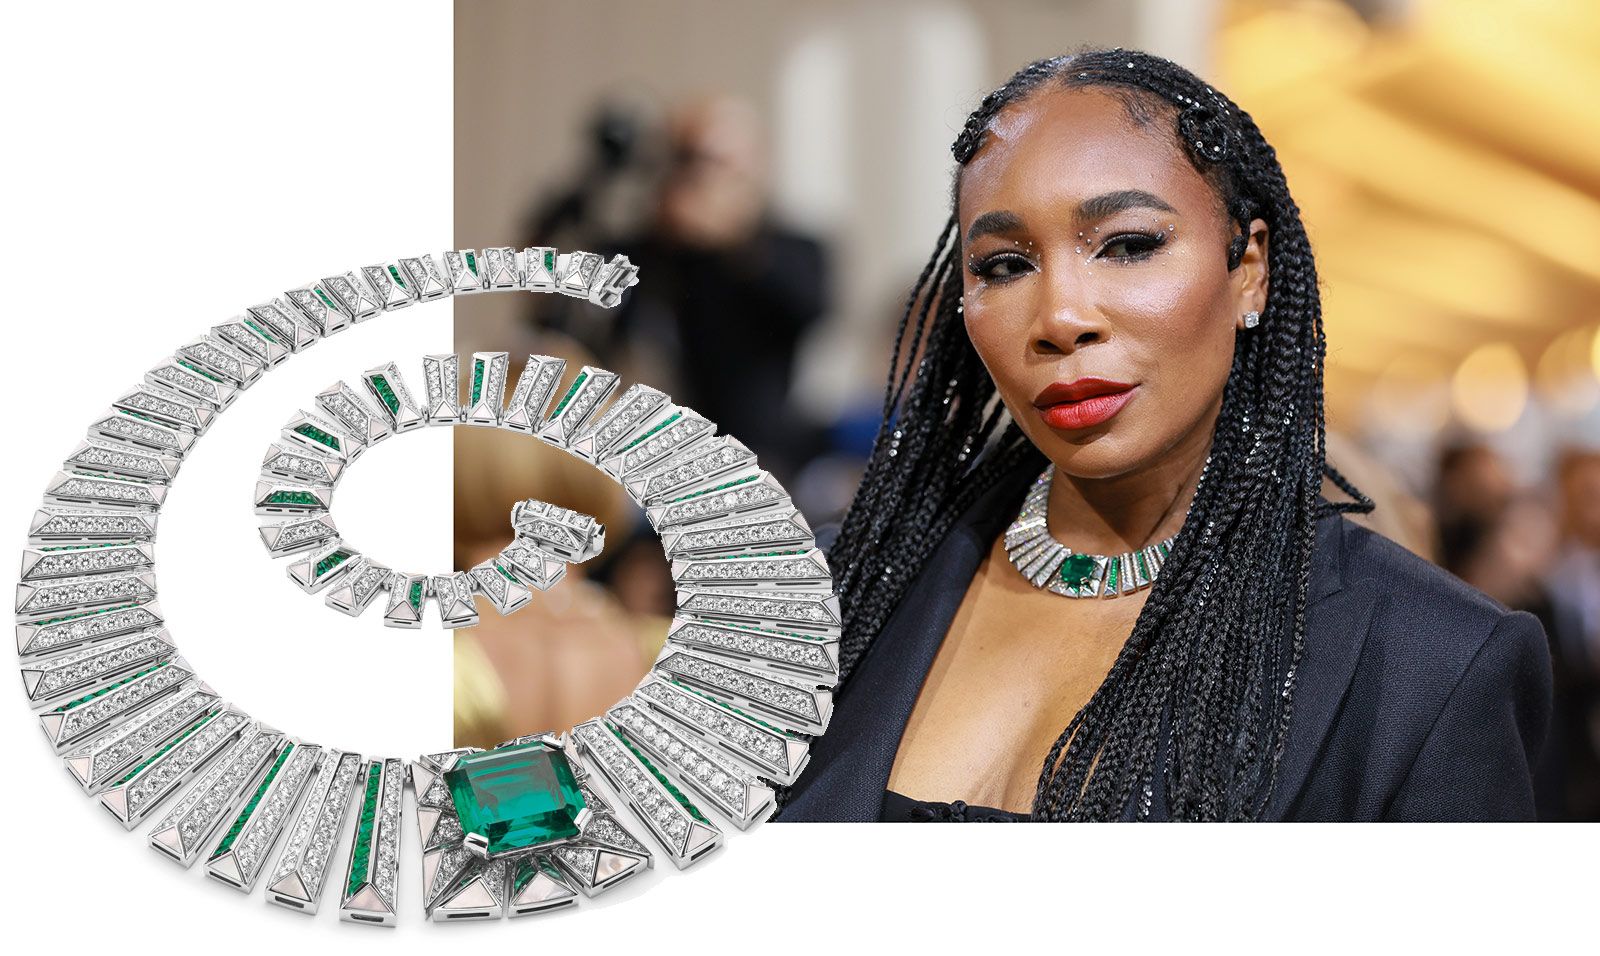 Venus Williams in a Bulgari High Jewellery necklace with over 34 carats of emeralds at the Met Gala 2022